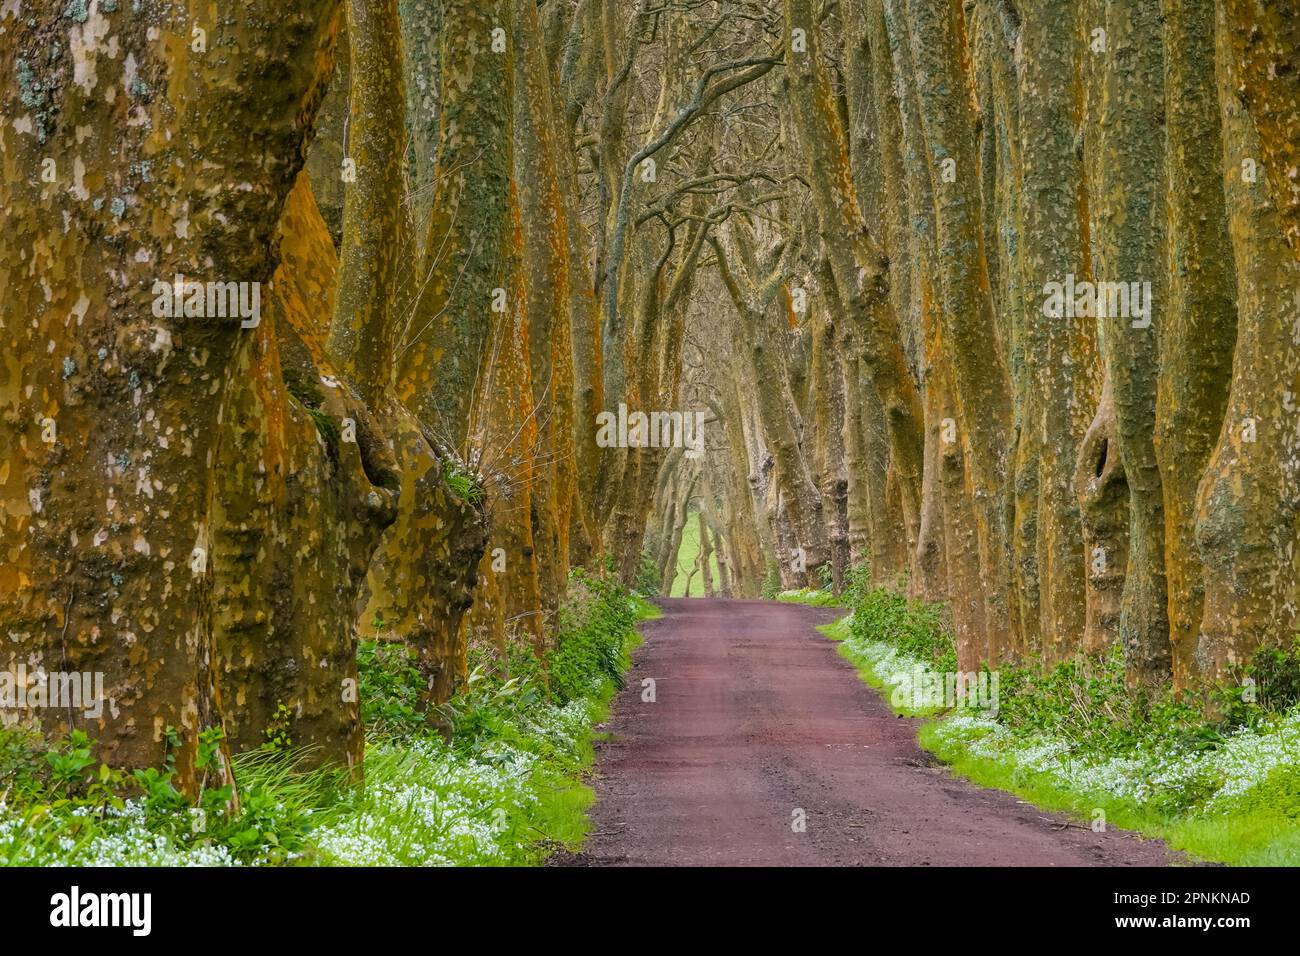 A red dirt road between massive London Plane trees forming a tree tunnel on the Azores Island of Sao Miguel near Povoacao, Portugal. Stock Photo